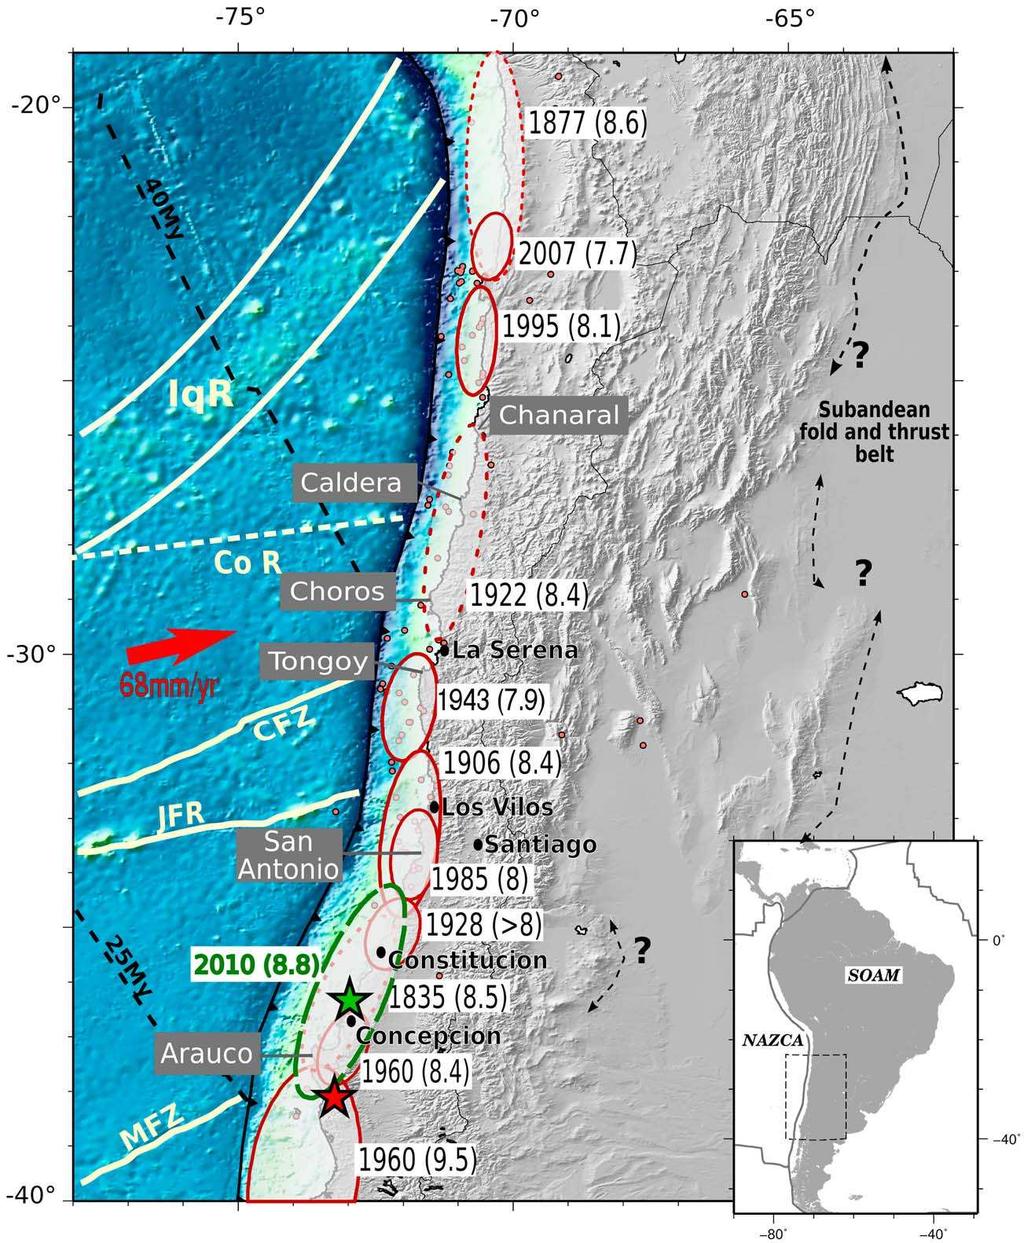 Figure 1. Seismotectonic background of the NAZCA-SOAM convergence zone and main geological features. Topography and bathymetry are from ETOPO1.